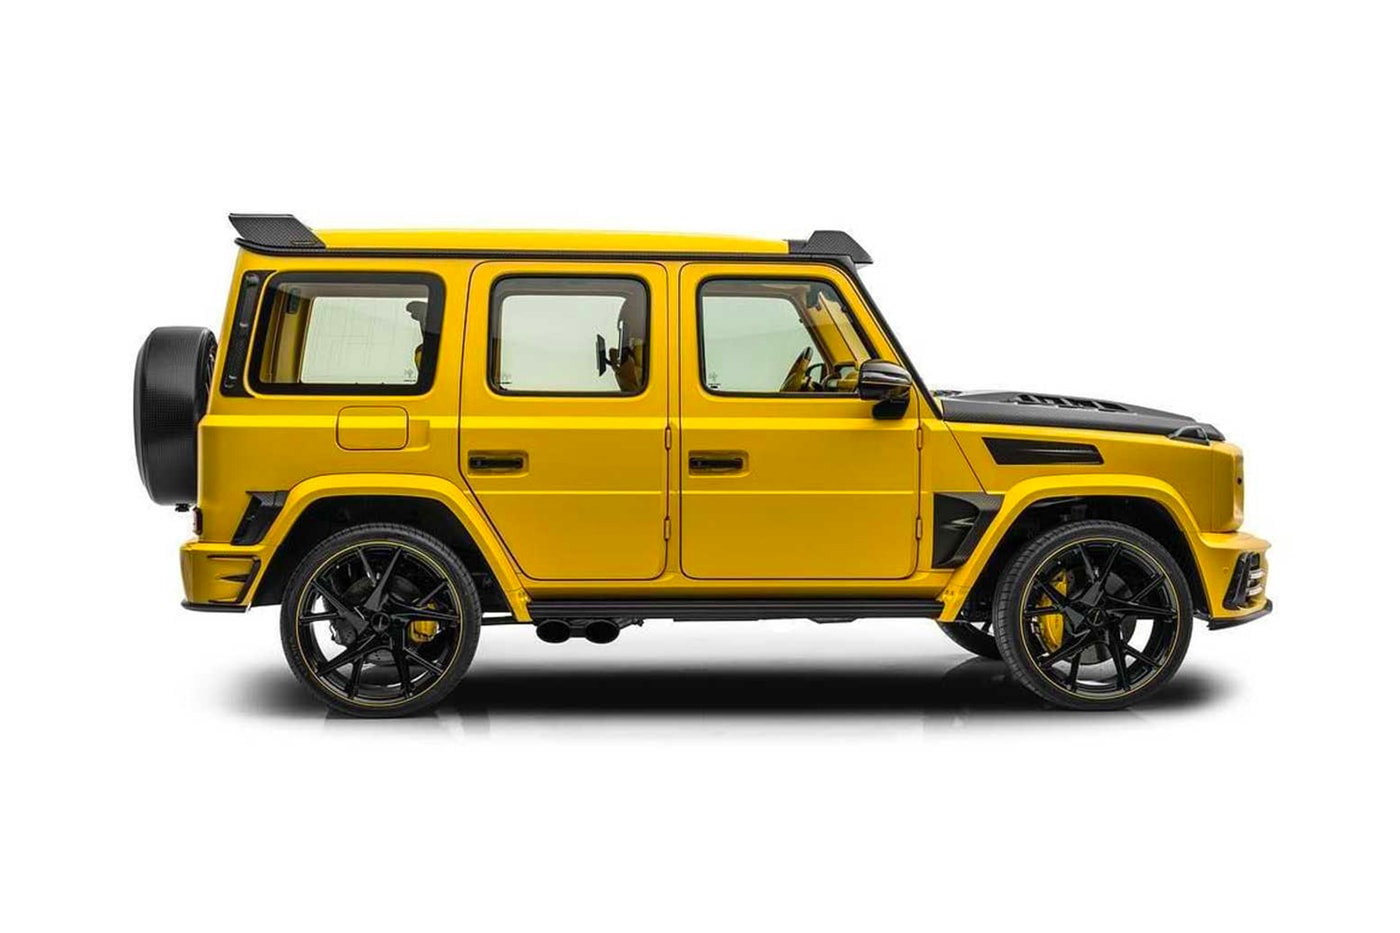 Mansory Gronos Mercedes-AMG G63 Matte Yellow bumblebee tuning premium SUV sports supercars carbon fiber 